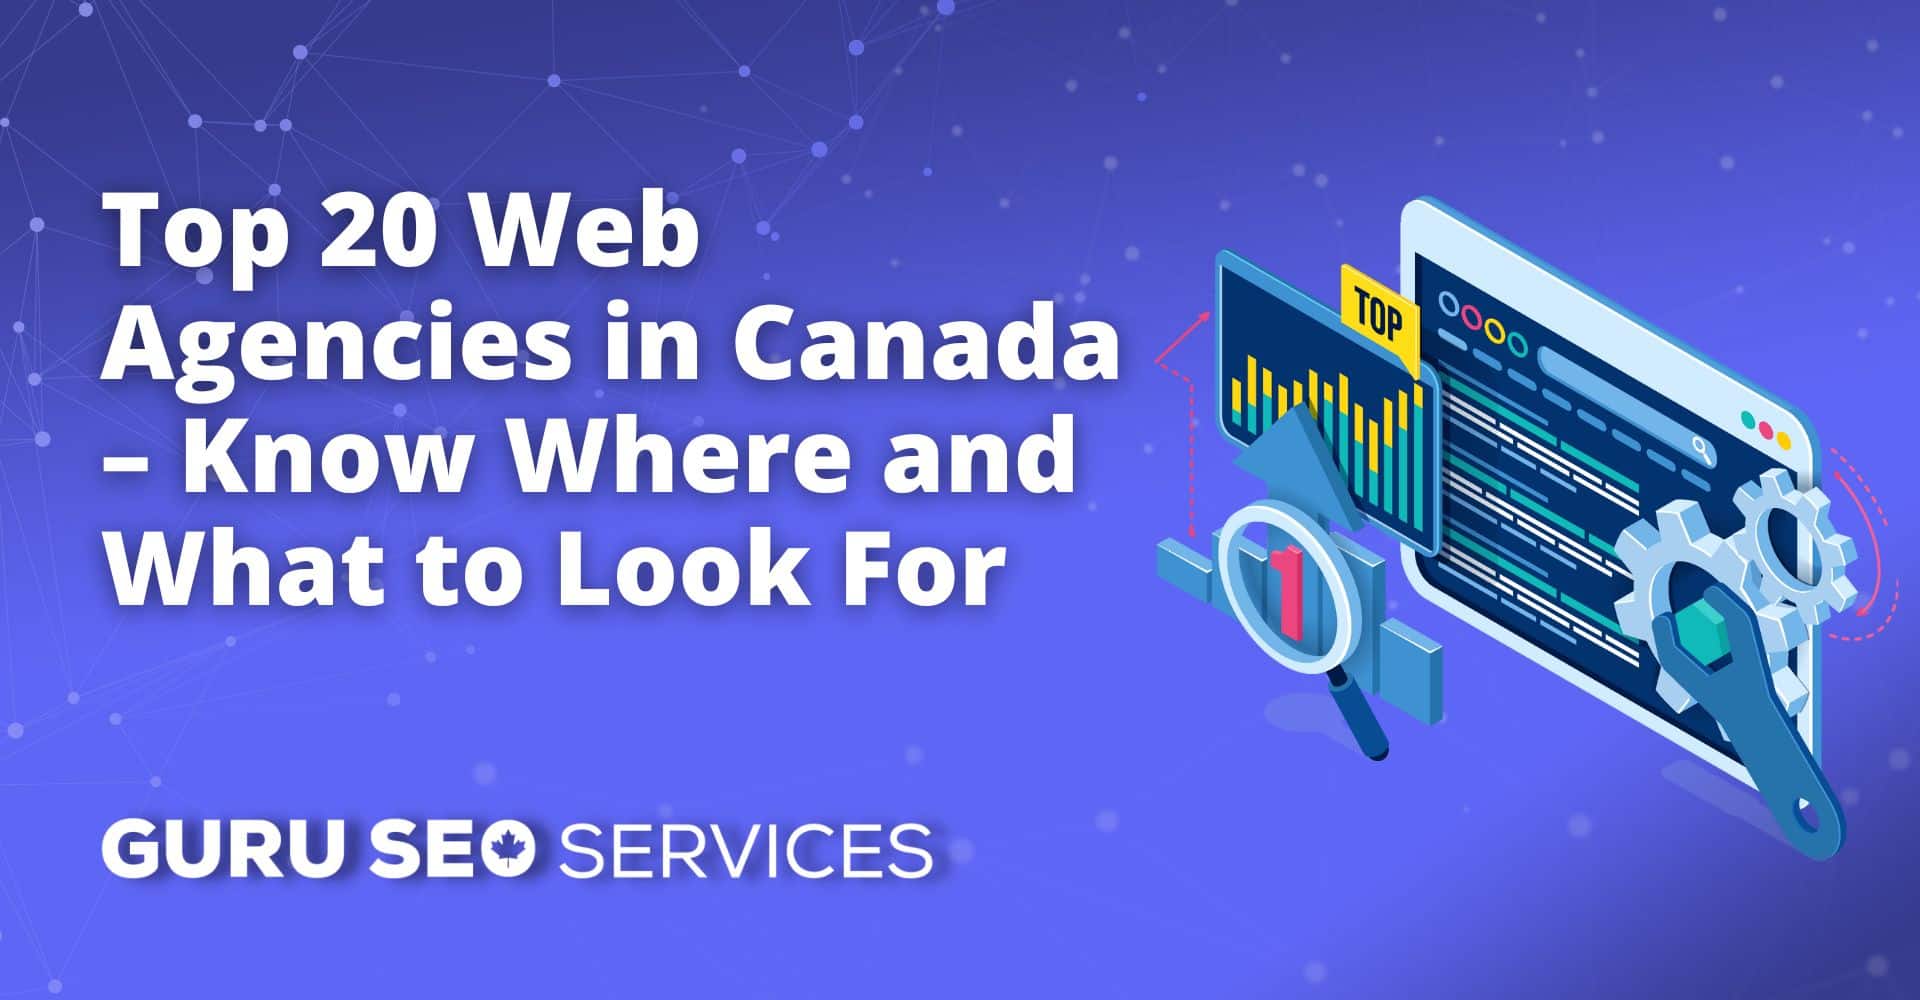 Discover the top 20 web agencies in Canada and find exactly where to look.